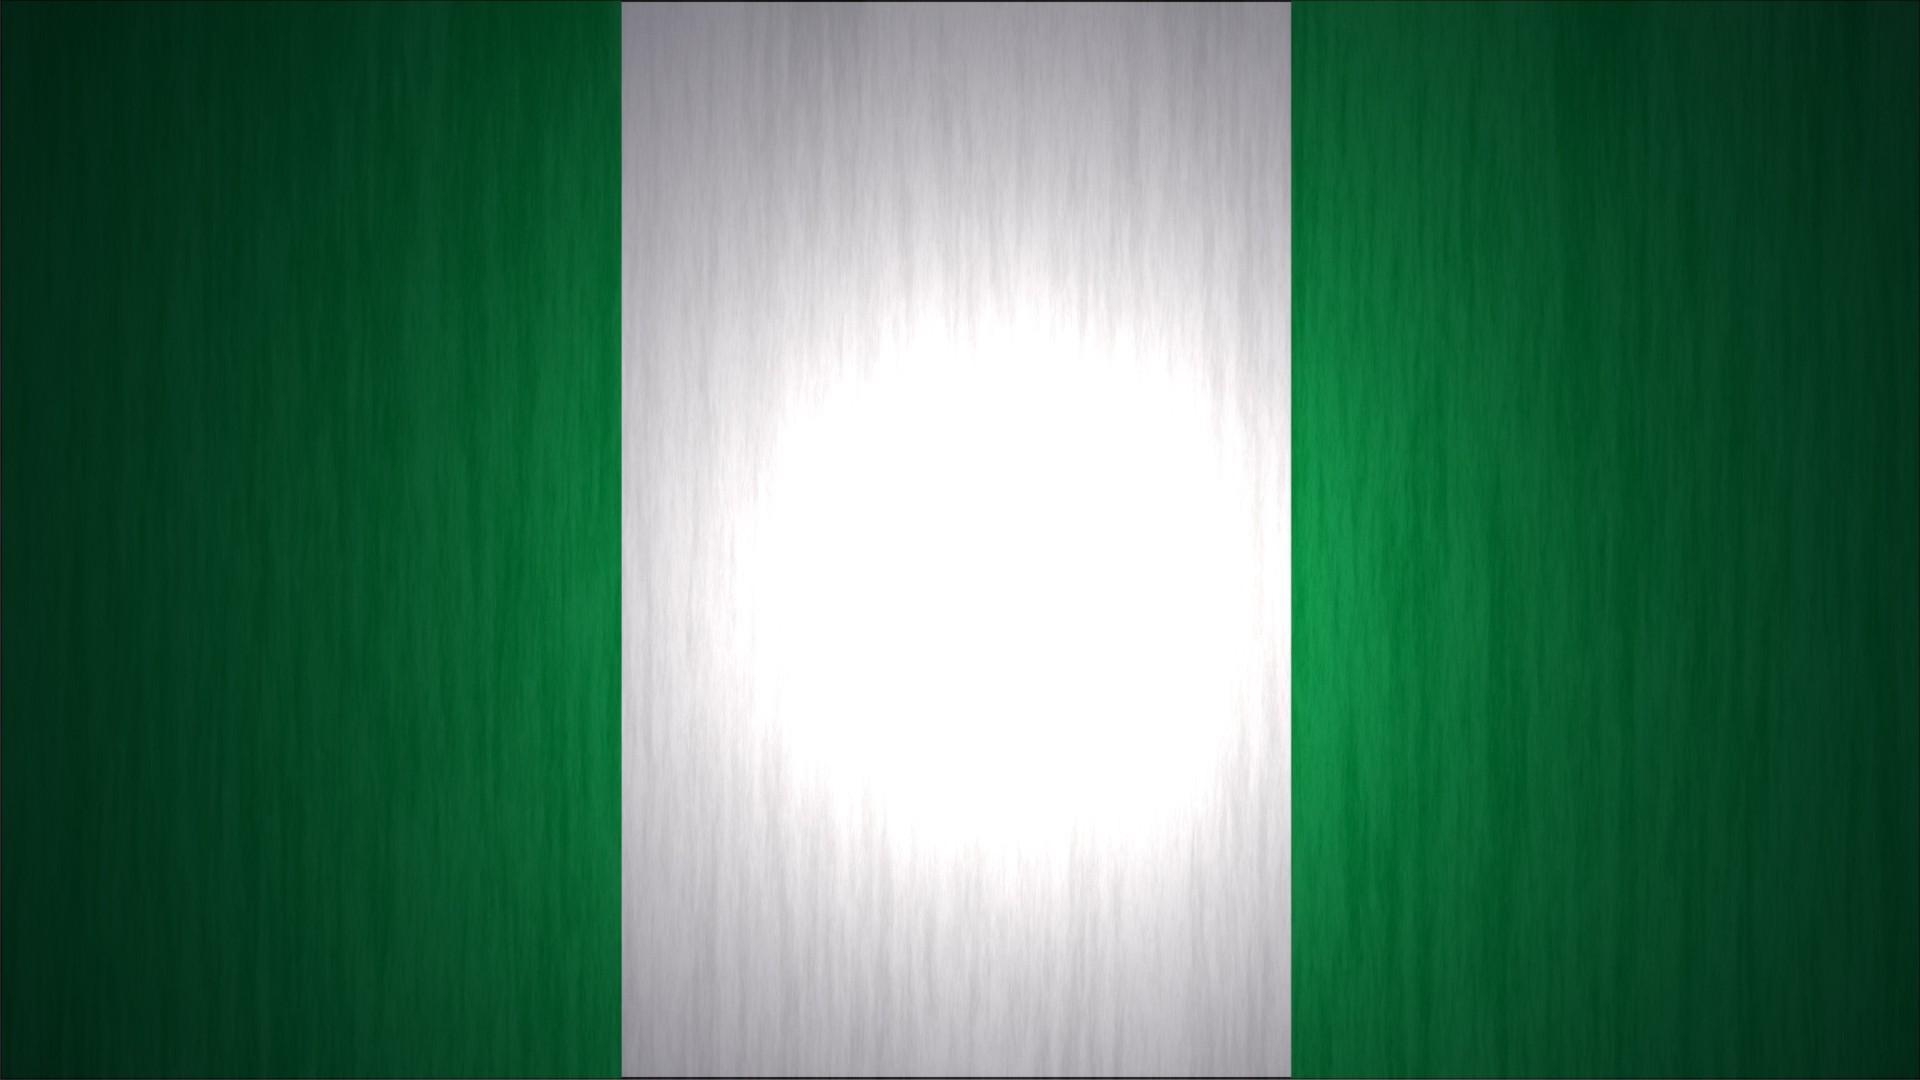 Free Download Nigeria Flag Wallpapers For Android Apk Download 1920x1080 For Your Desktop Mobile Tablet Explore 22 Nigeria Flag Wallpapers Nigeria Flag Wallpapers Nigeria National Football Team Wallpapers Flag Background Wallpaper - roblox hd wallpaper 4k background for android apk download